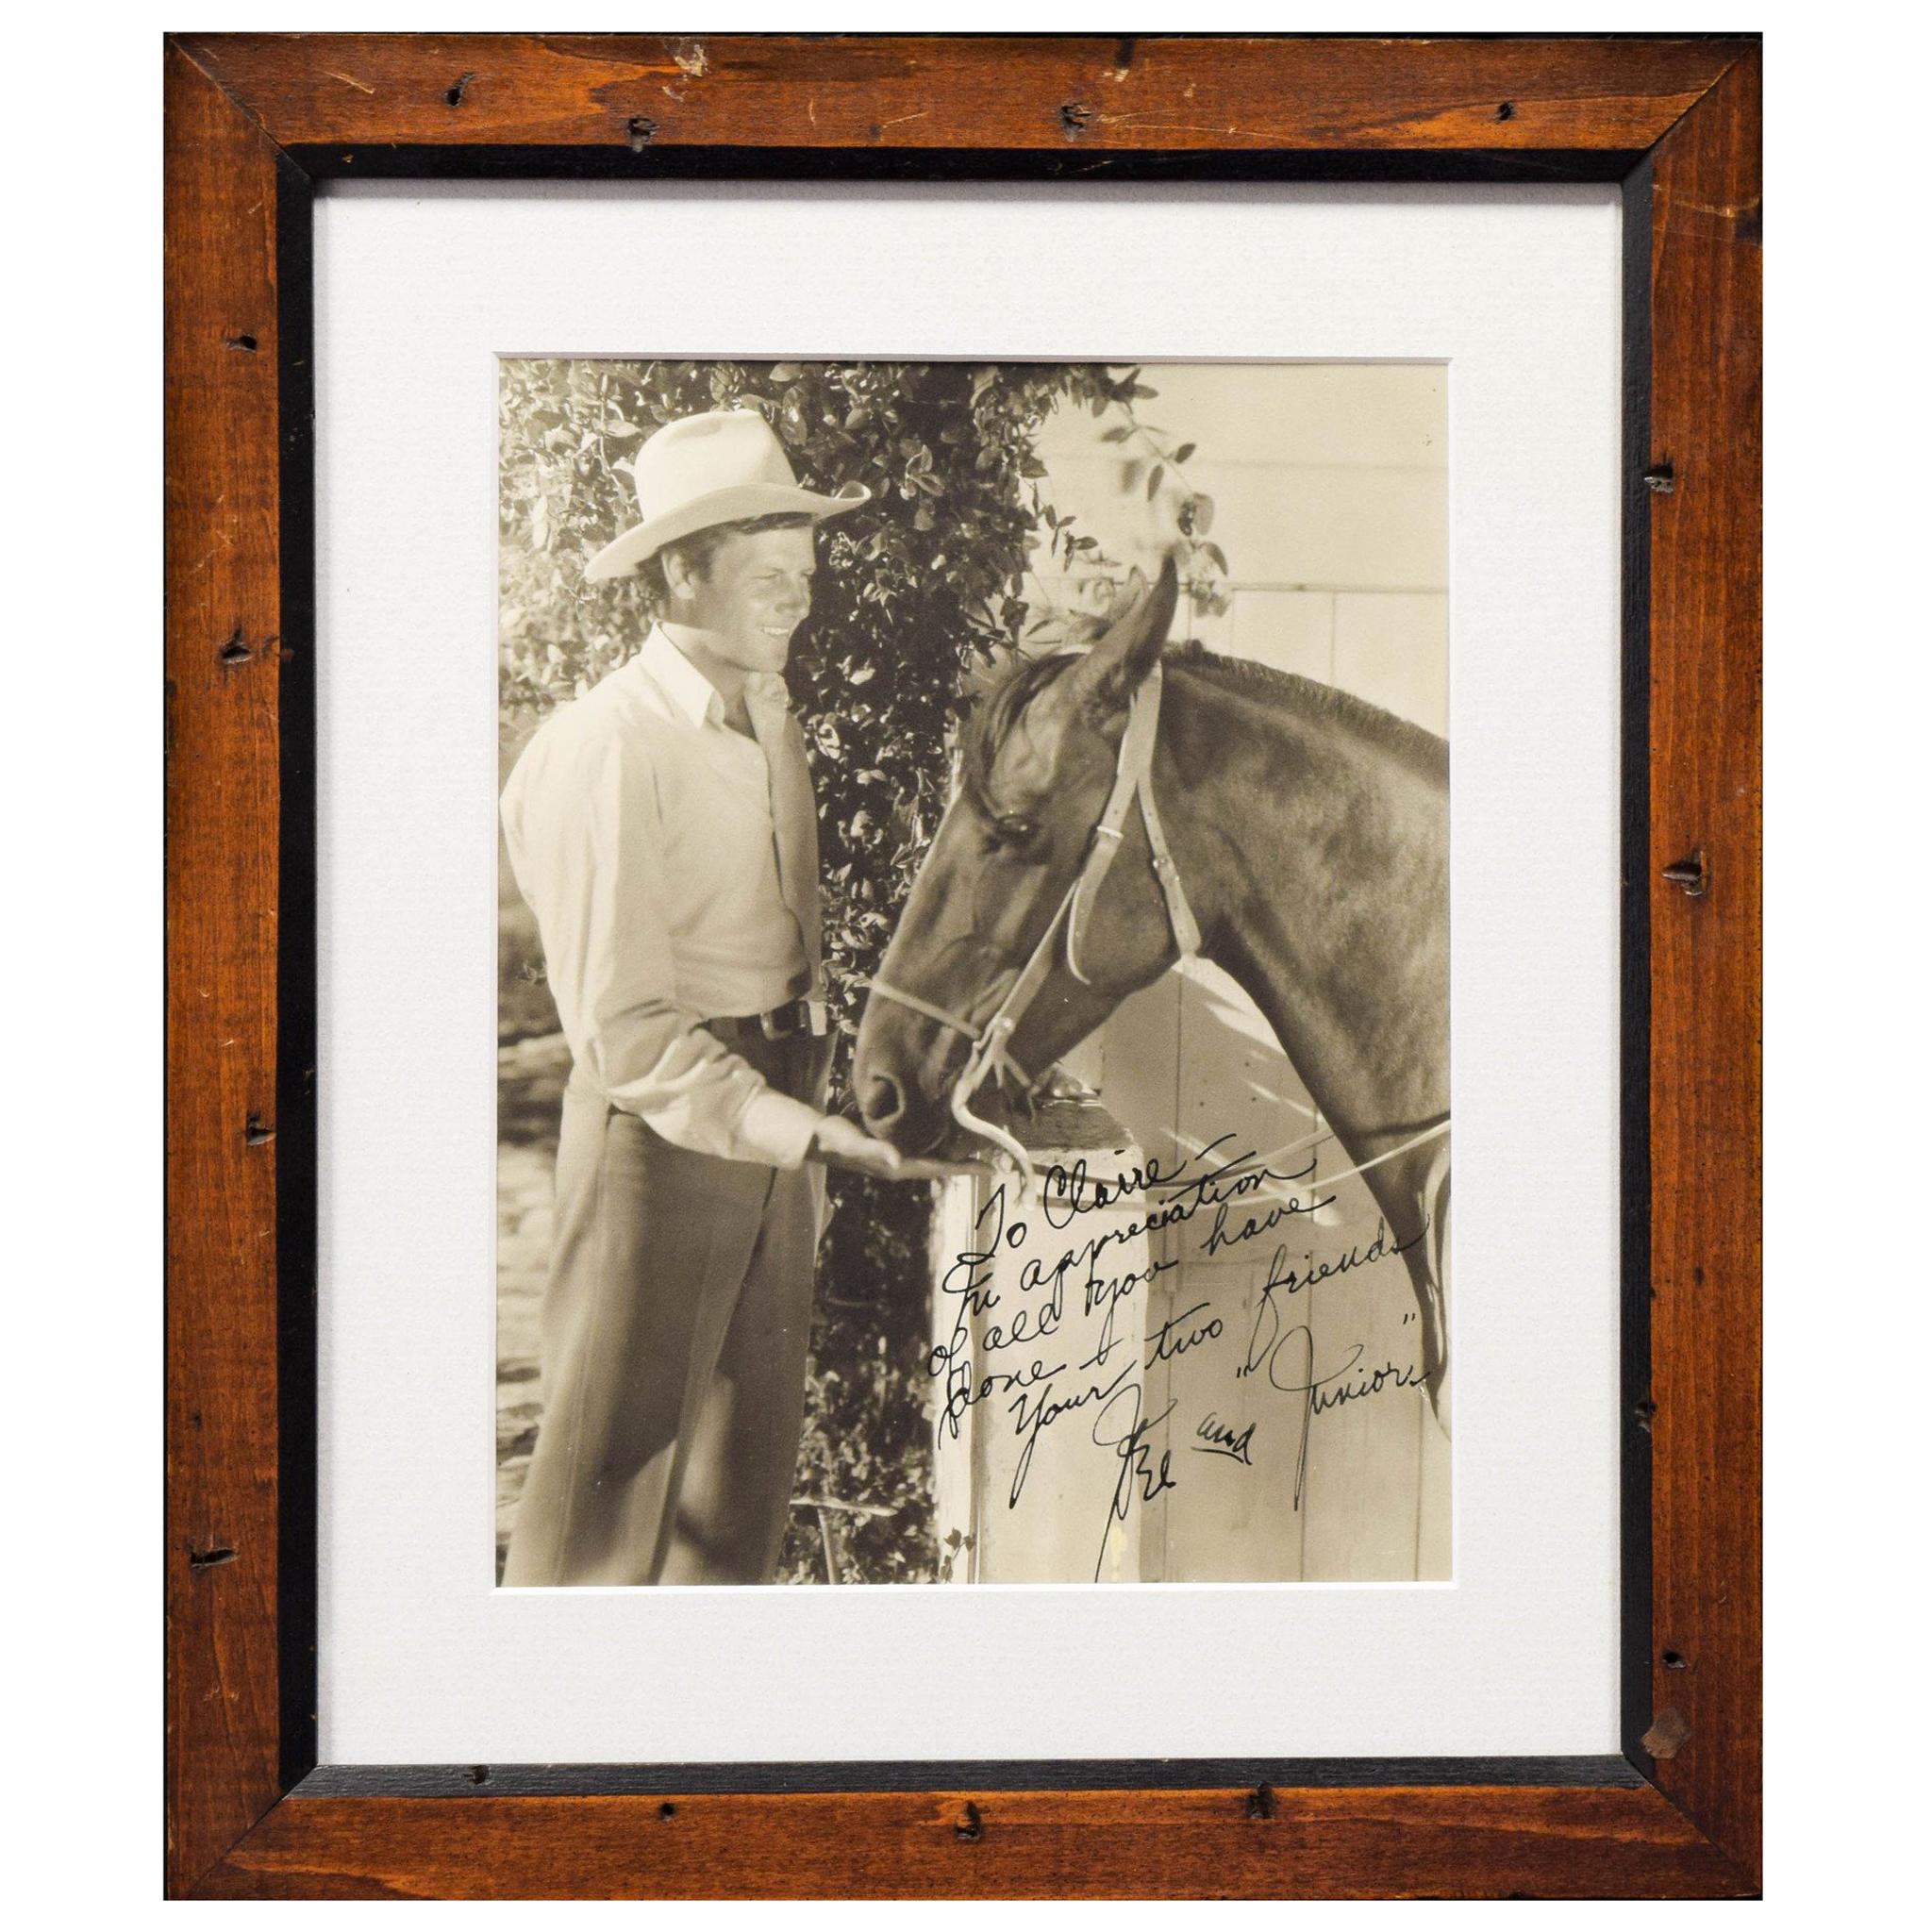 Framed and Signed Photograph of Jerry McCree and Junio